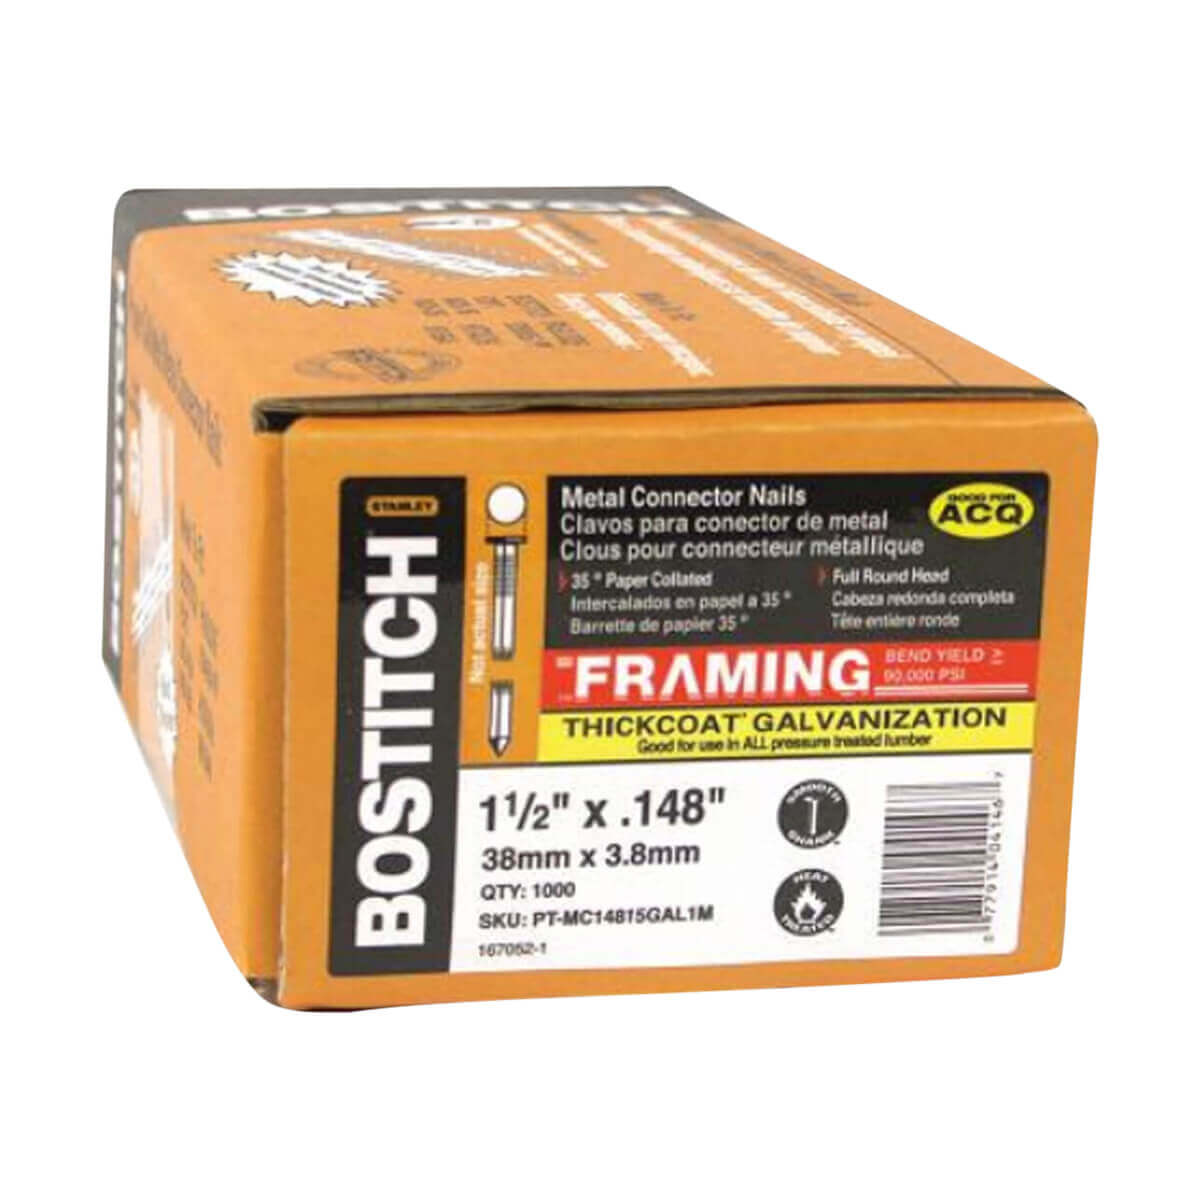 Bostitch Metal Connector Nails - 1-1/2-in x .148-in 35° - ACQ - Box of 1000